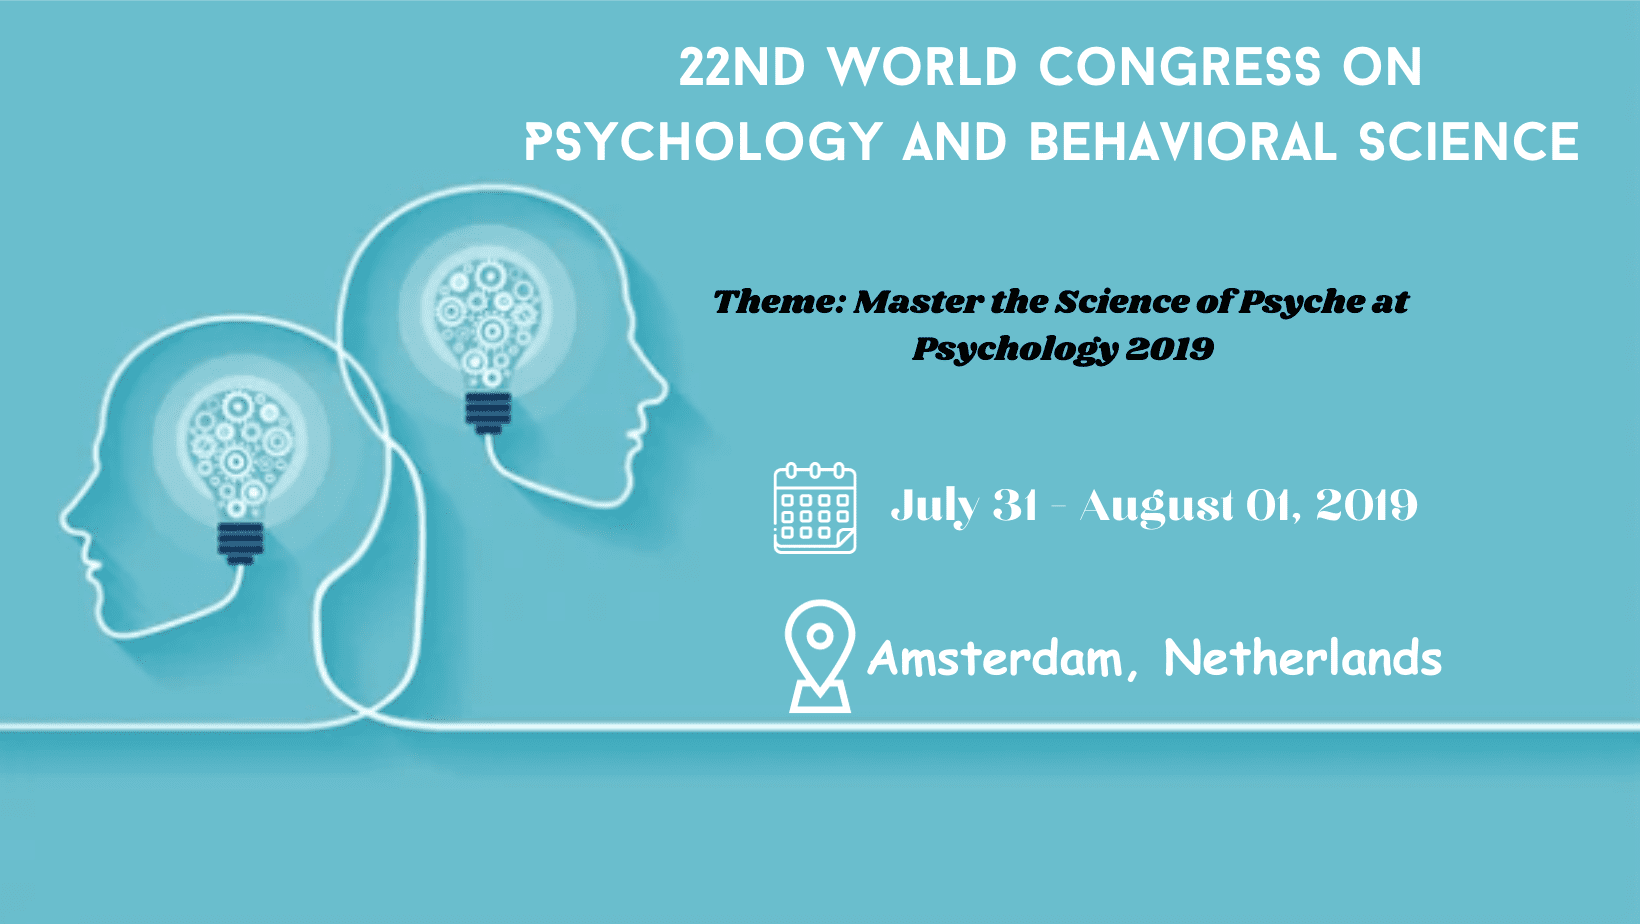 https://www.pulsus.com/conference-abstracts/psychology-2019-proceedings.html